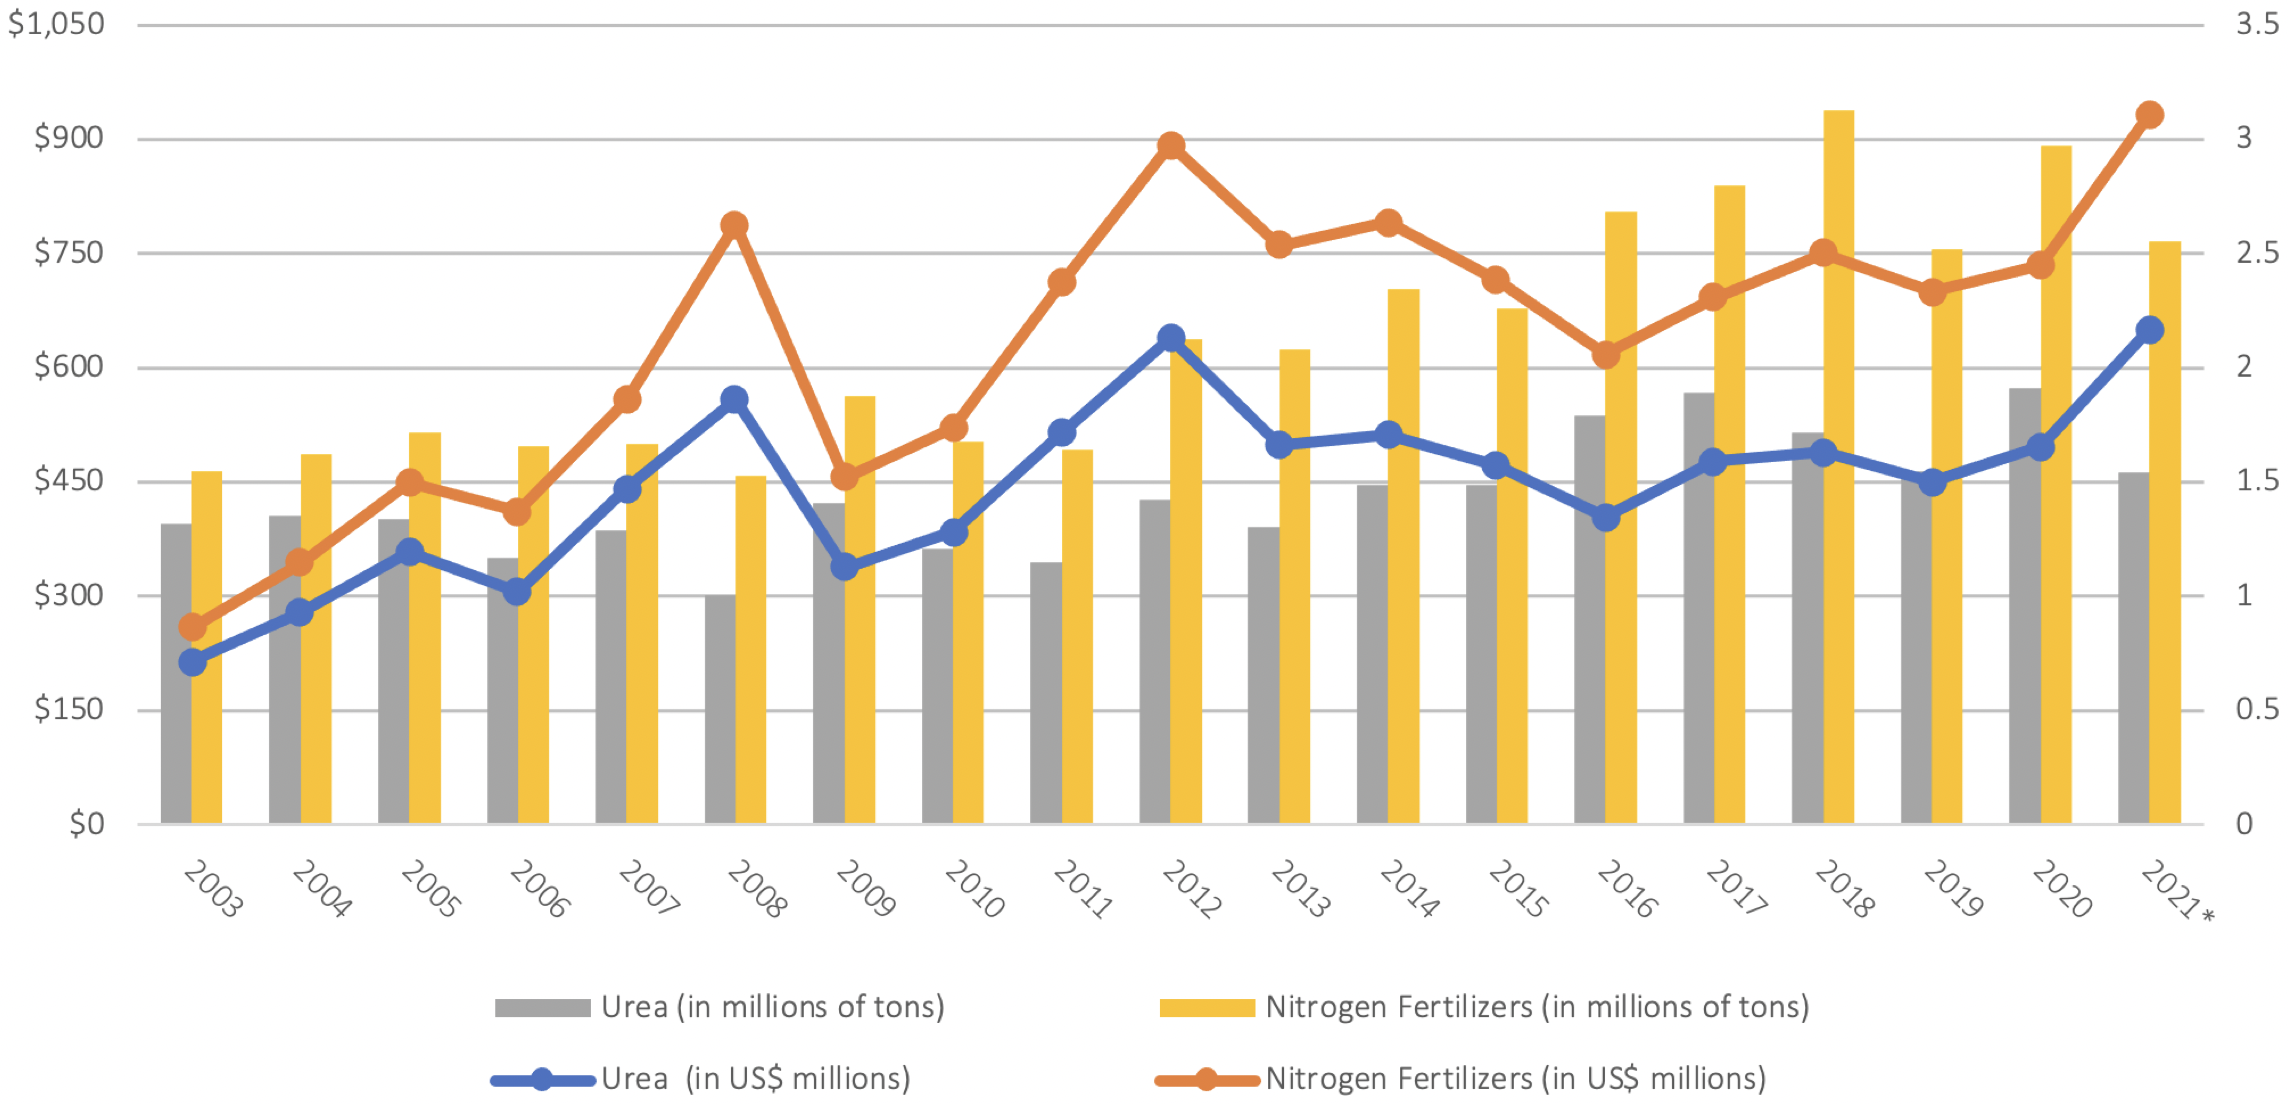 This graph compares Mexico's imports of urea and nitrogen fertilizers over time.